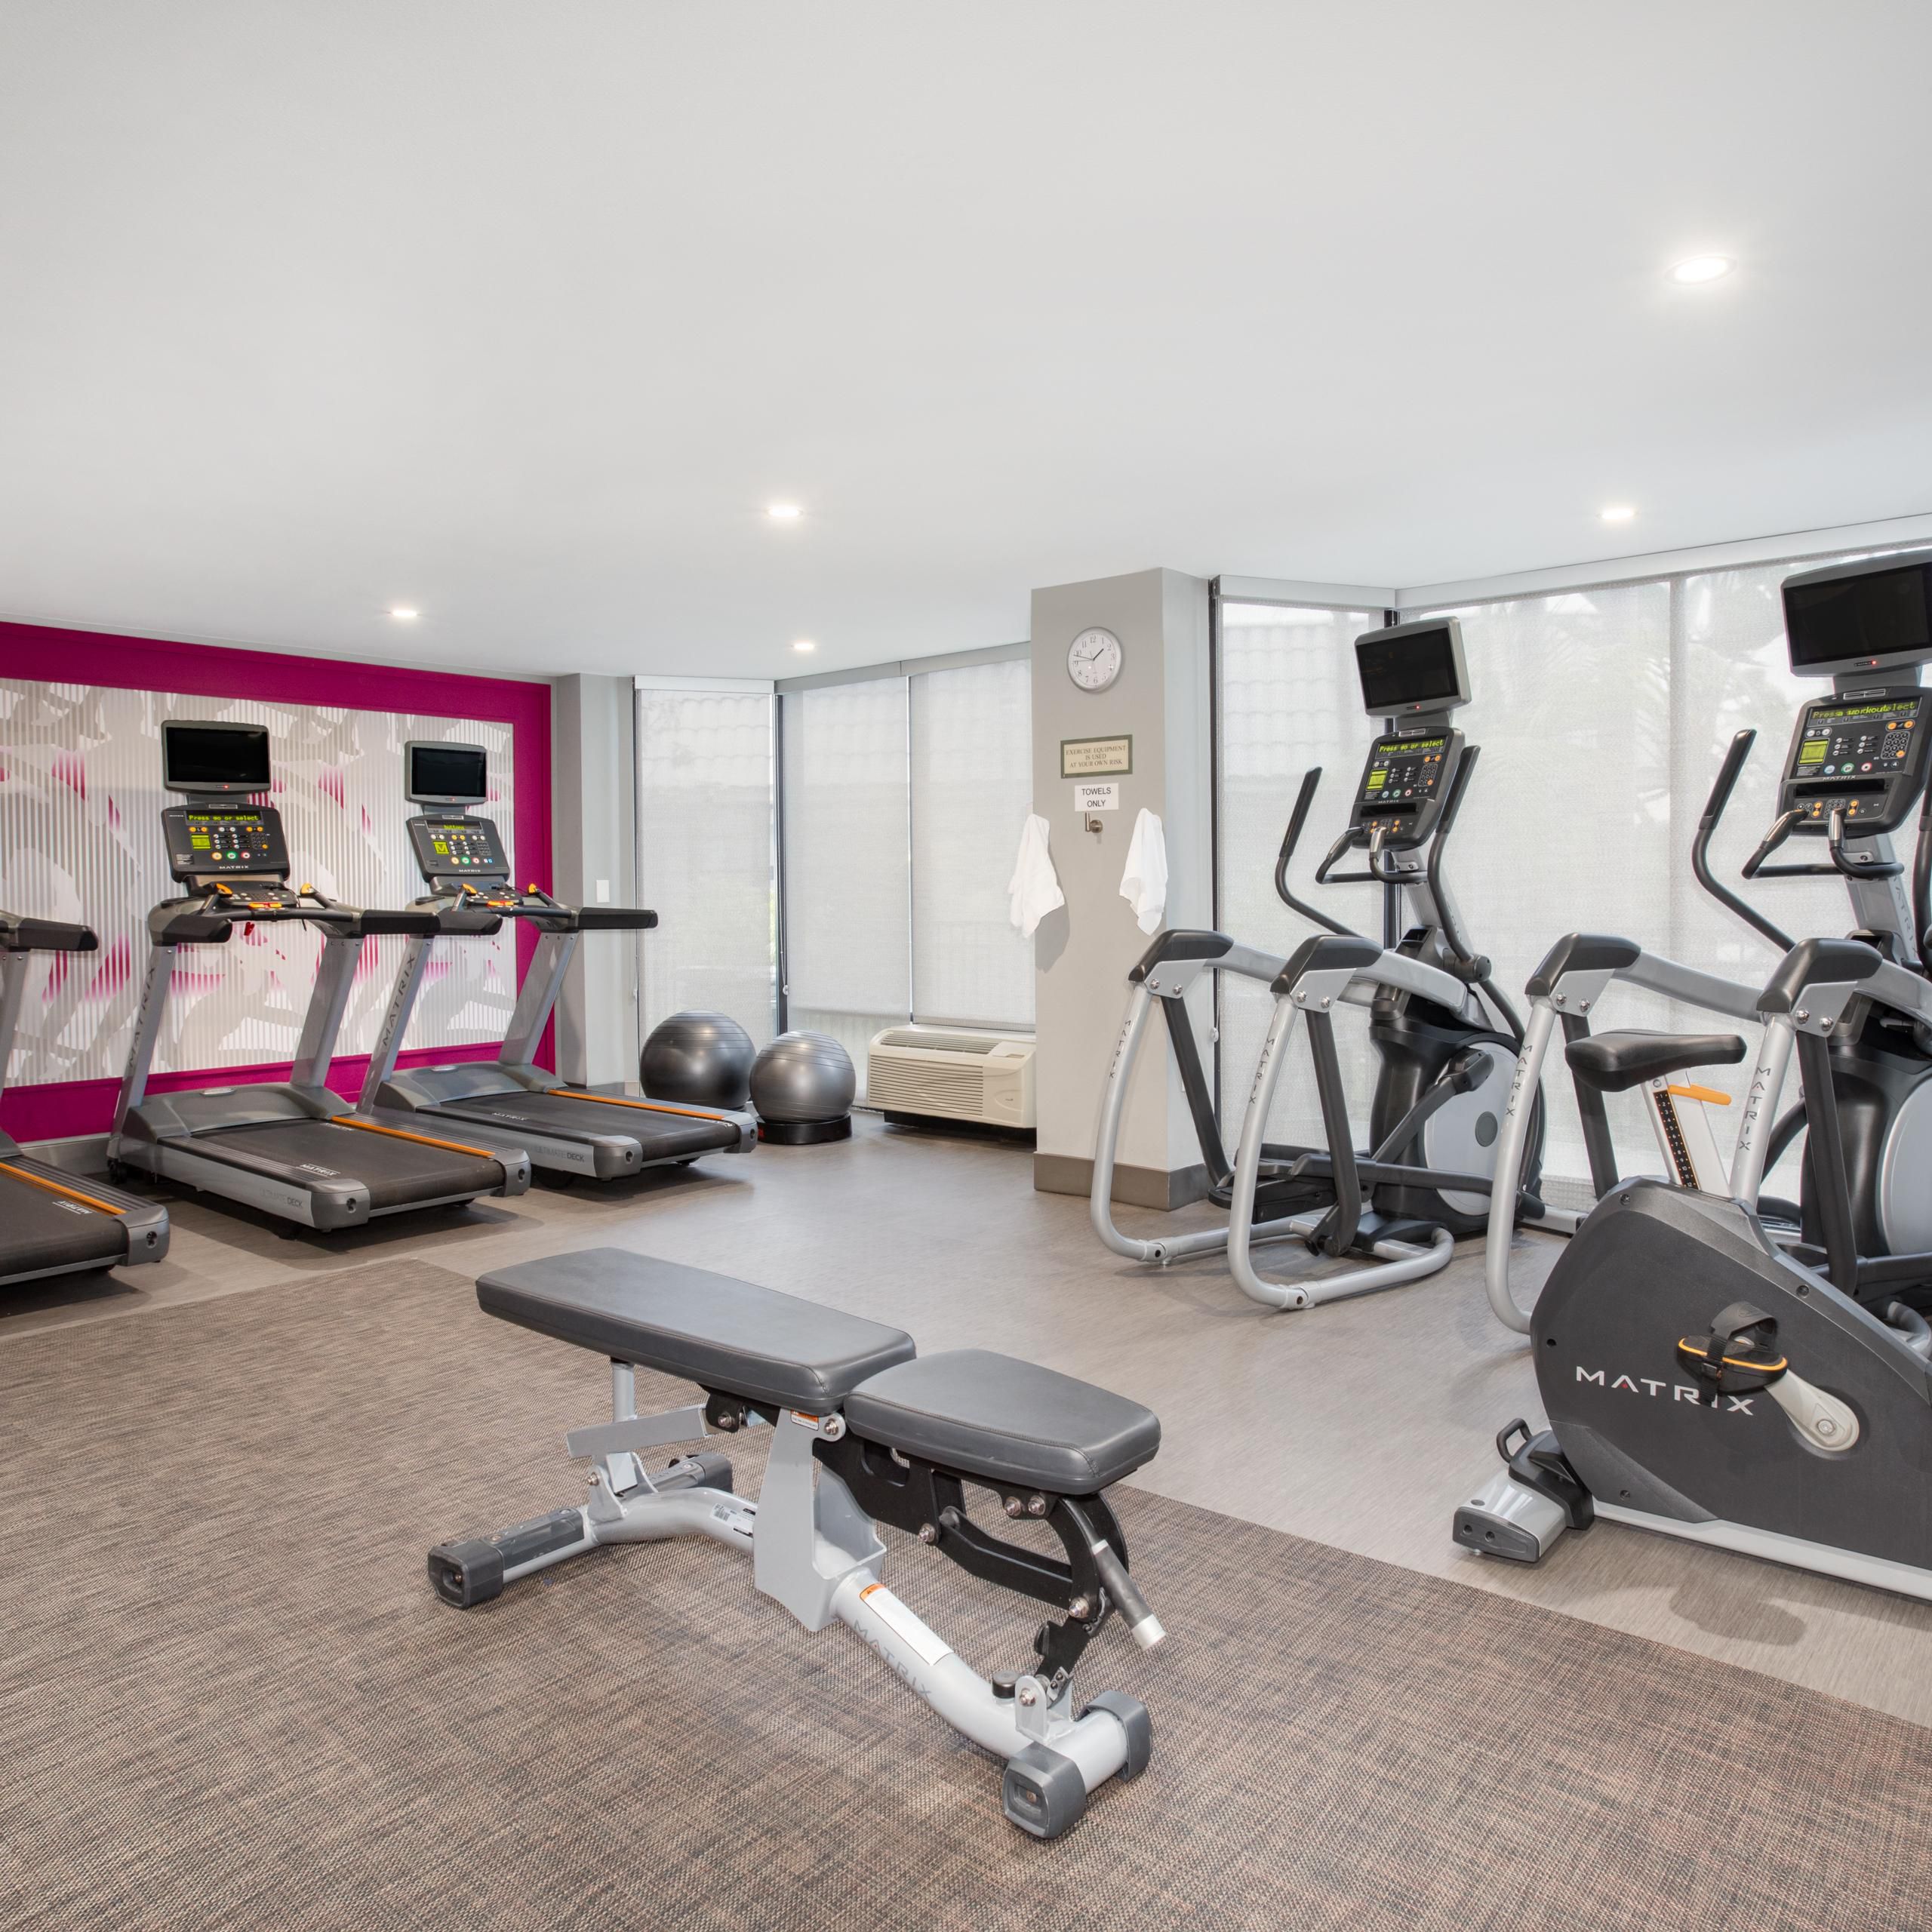 Continue your workout regimen in our 24 hour fitness center.